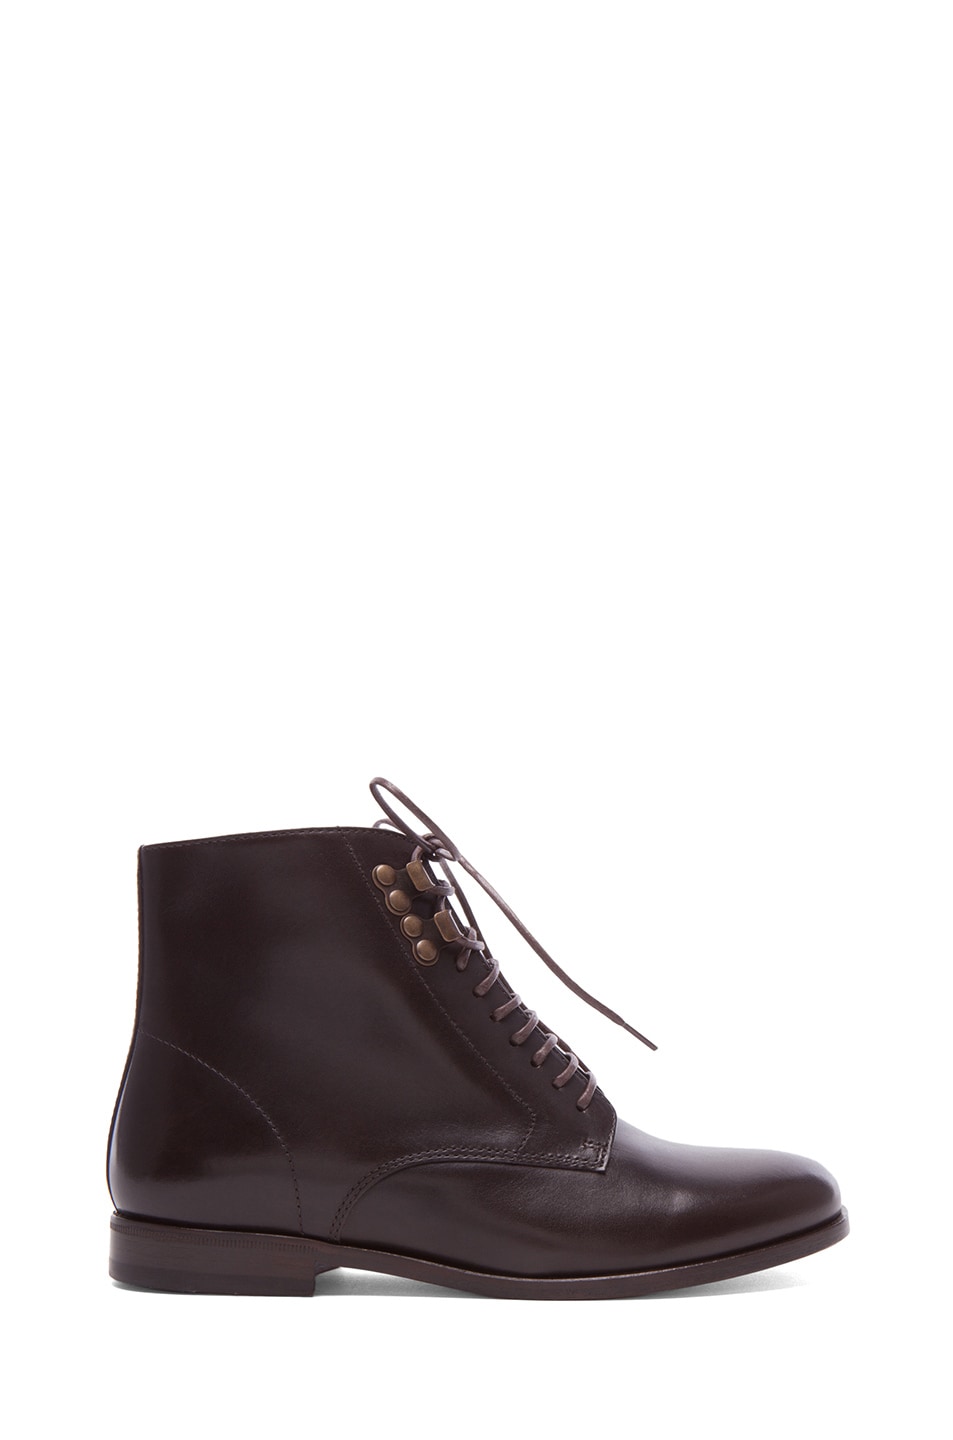 Image 1 of A.P.C. Francoise Leather Lace Up Boots in Marron Fonce